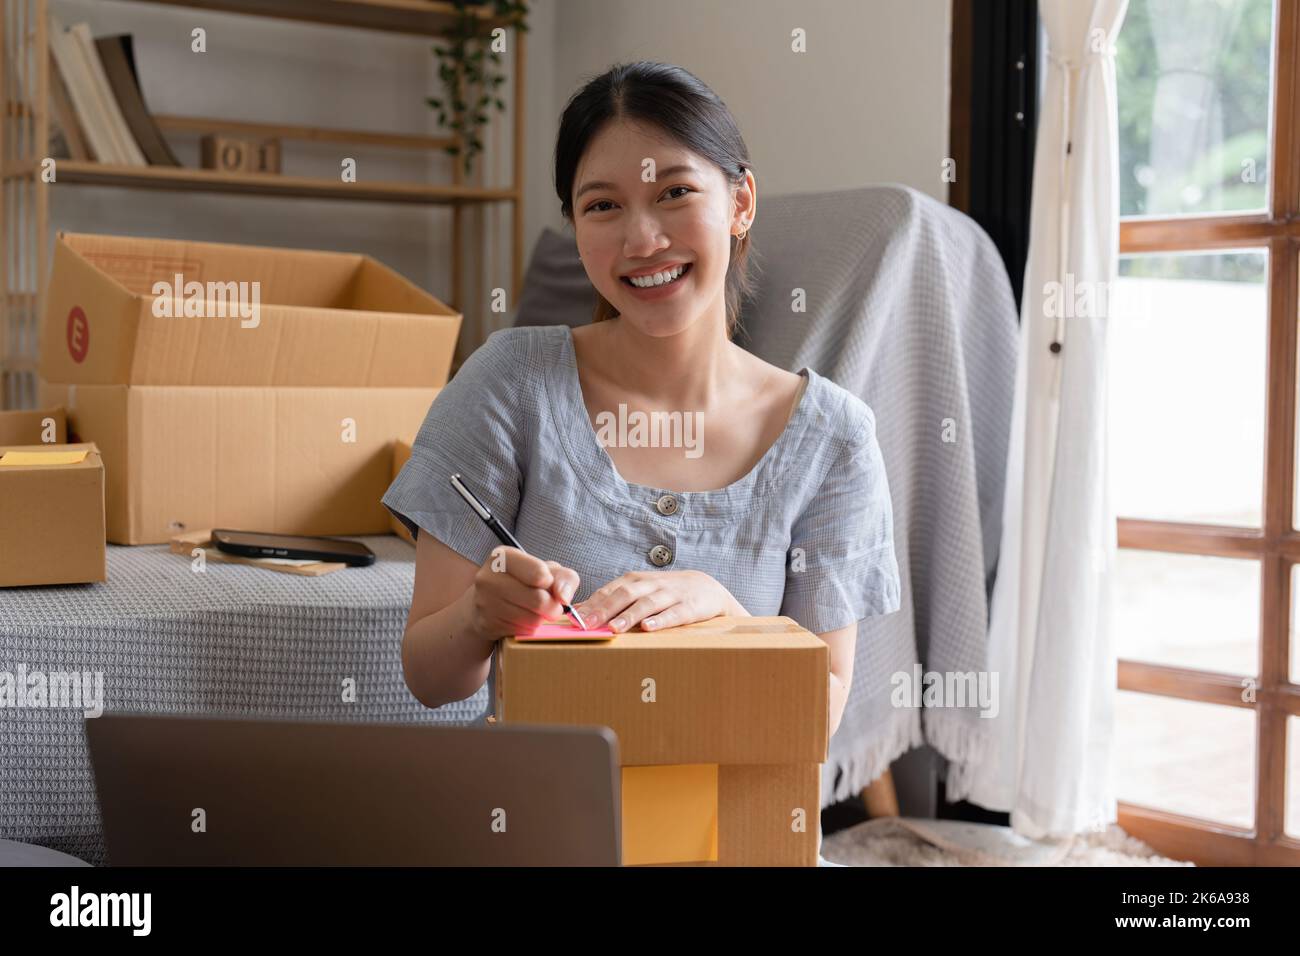 Asian small business owner working at home office. Business retail market and online sell marketing delivery, SME e-commerce concept Stock Photo